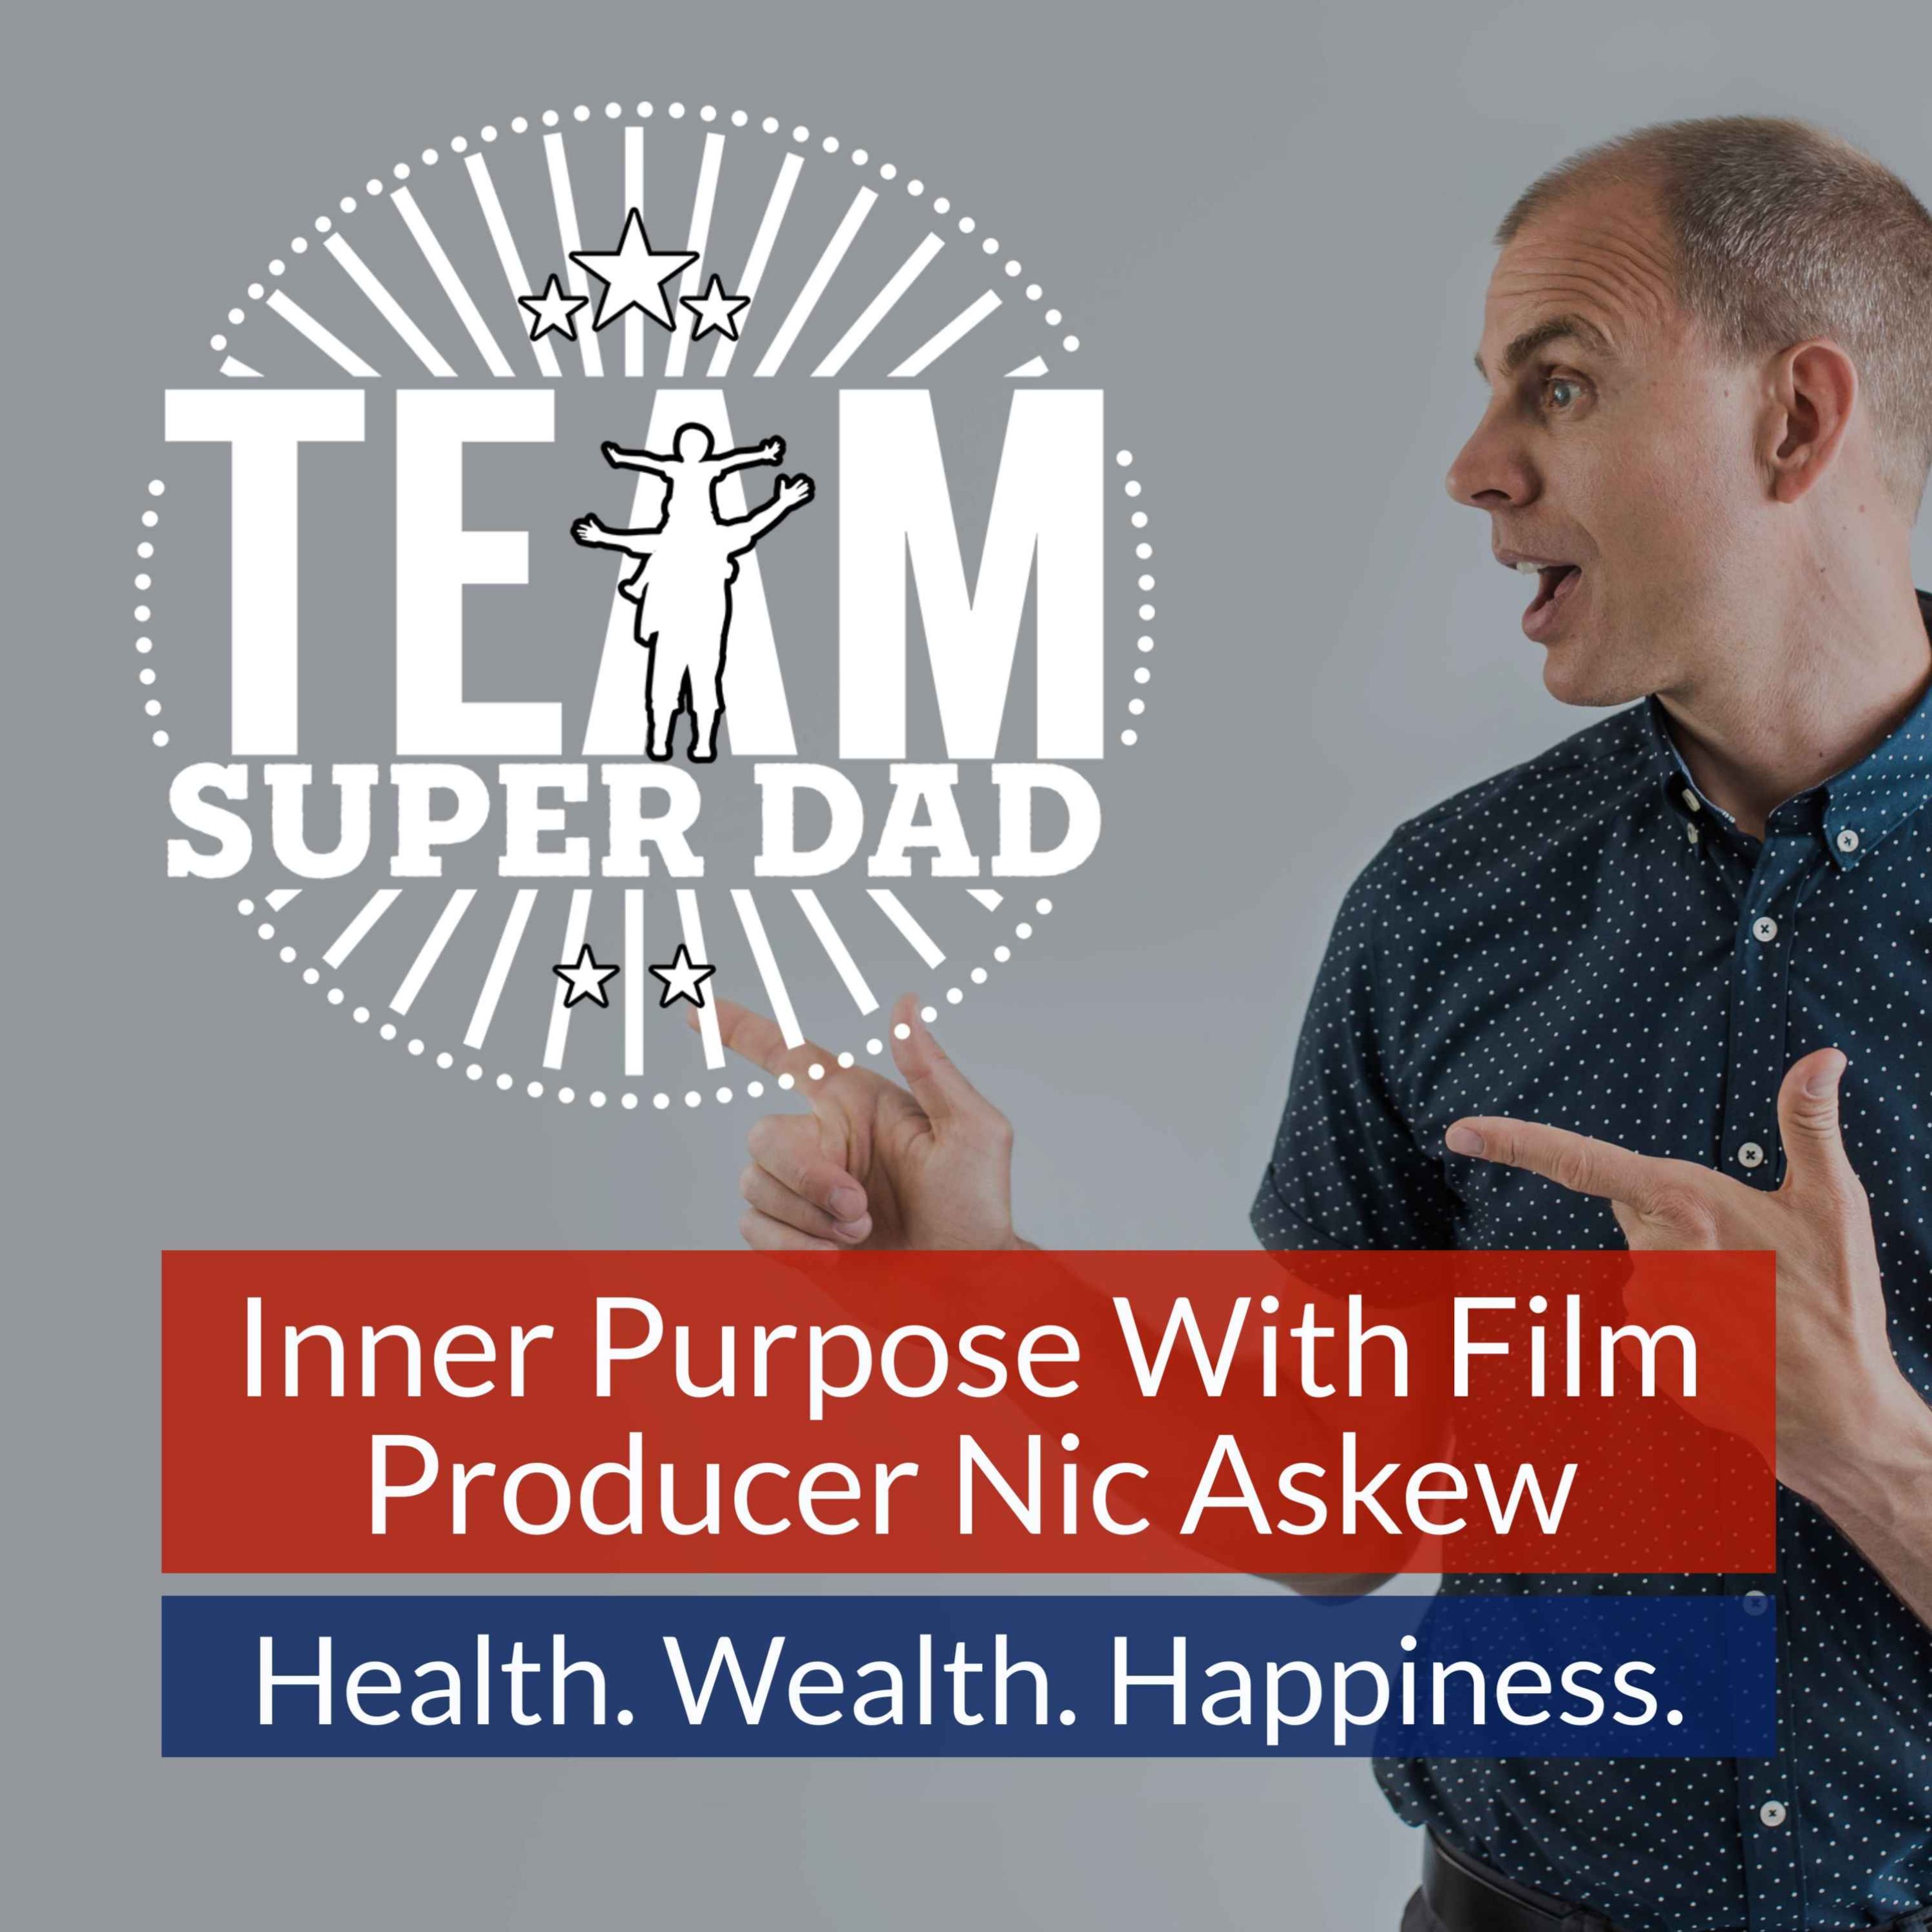 Following Your Inner Purpose with Film Producer Nic Askew